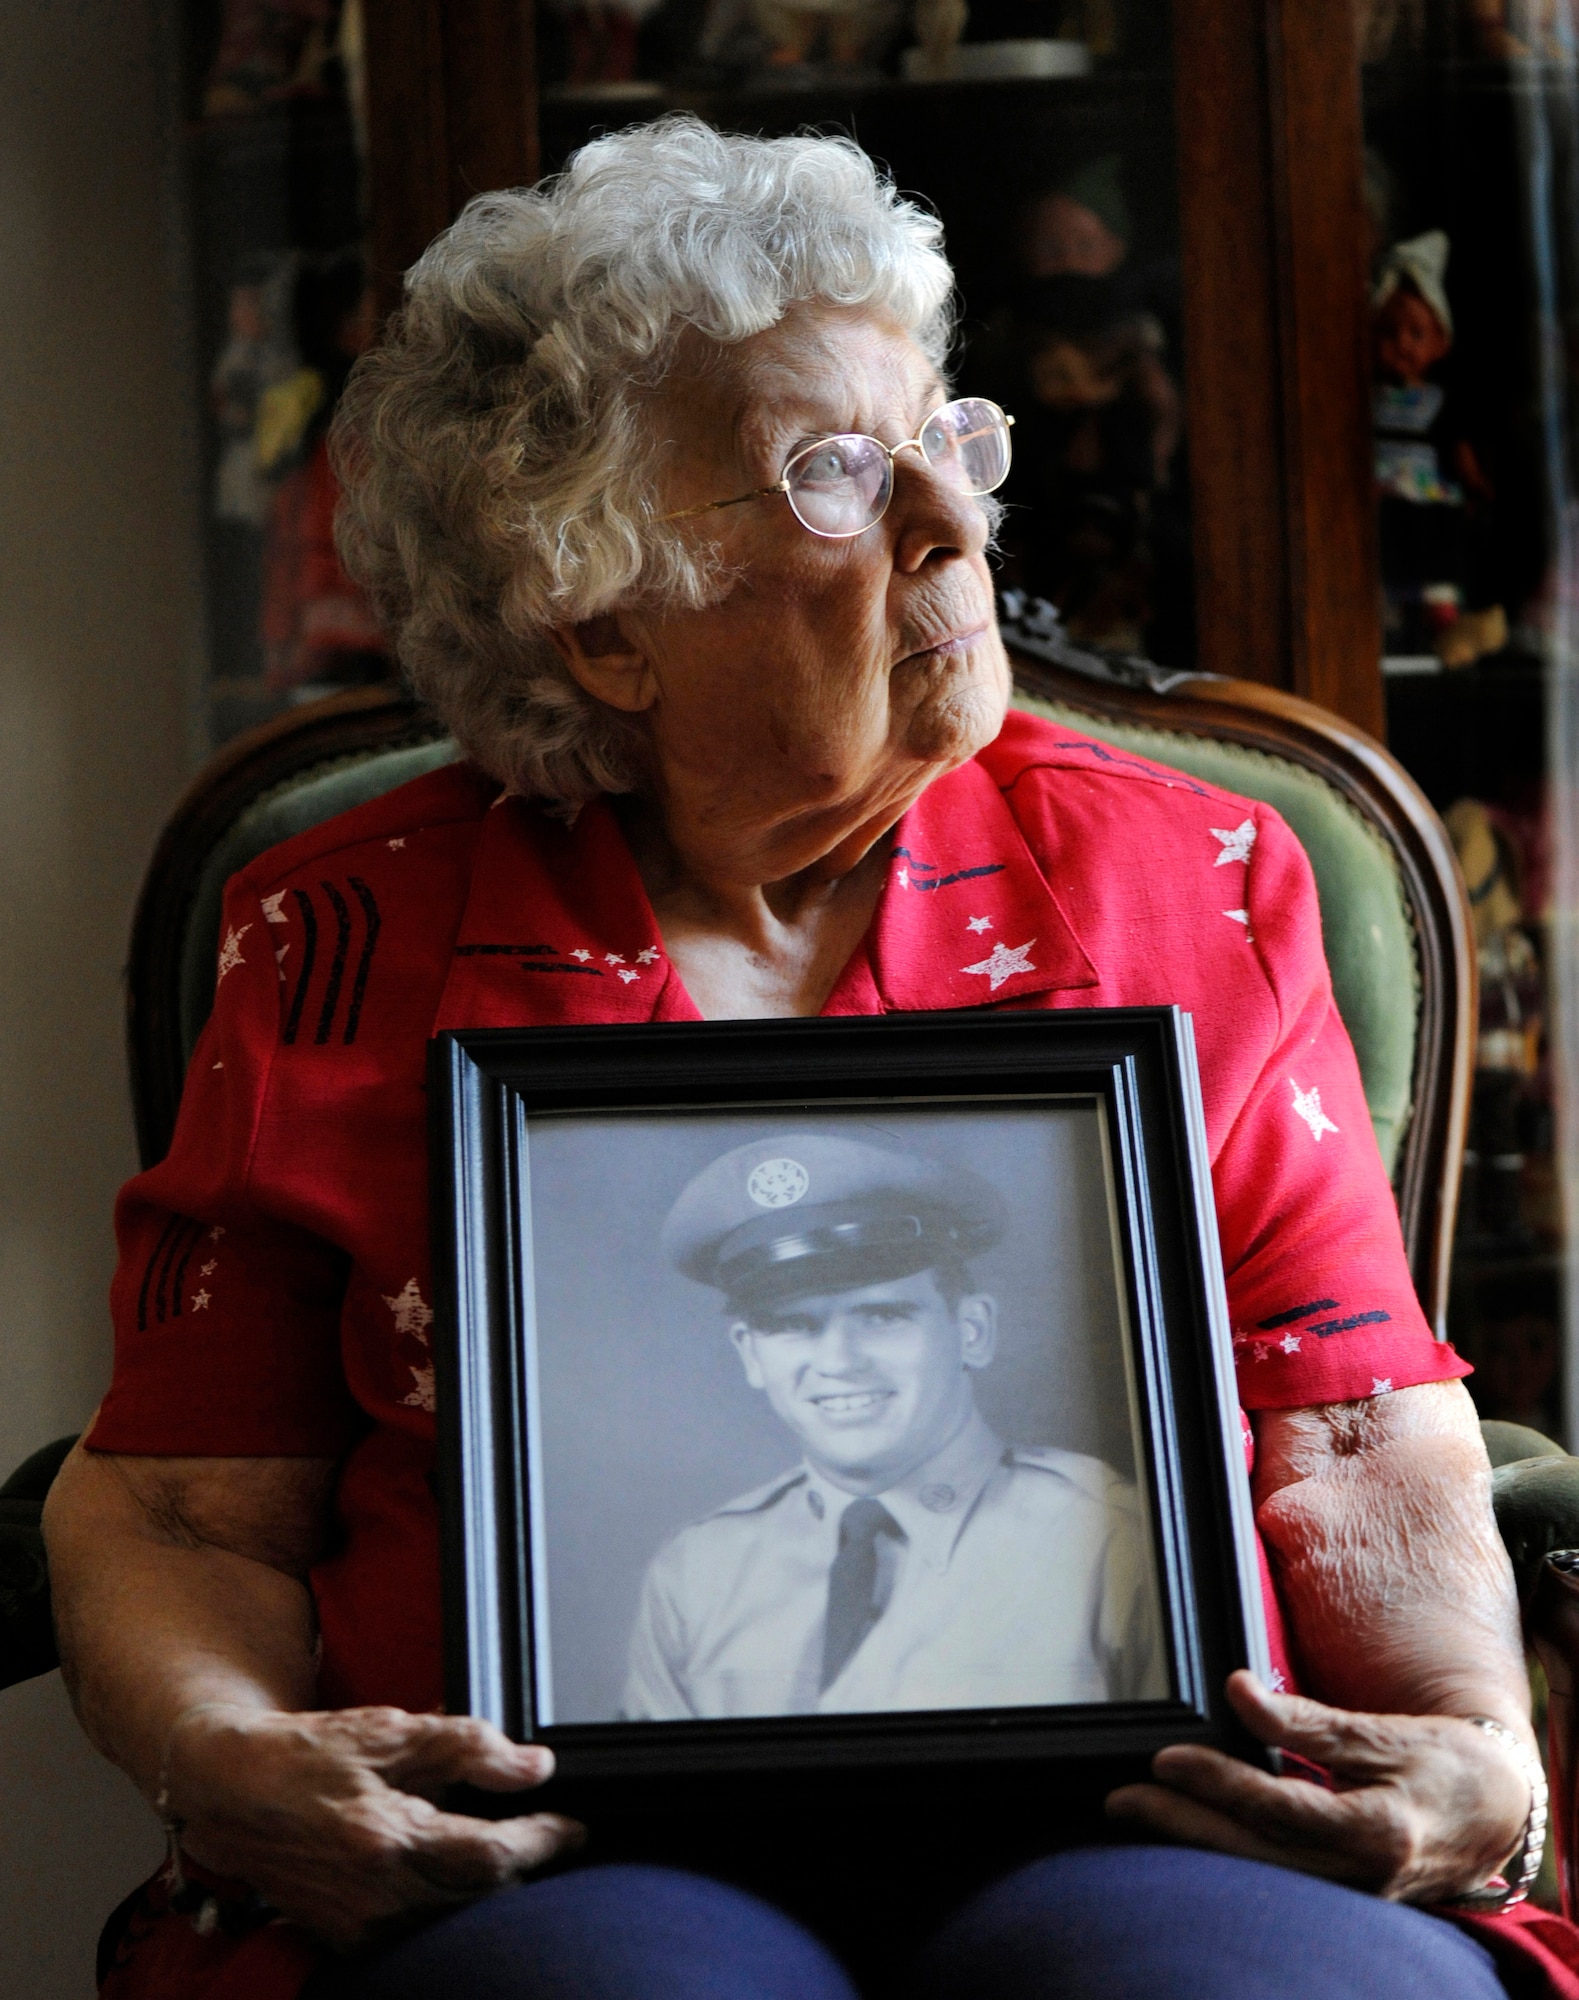 Rosalie Bacicia, sister of the late Master Sgt. James Calfee, reflects as she holds a photo of her brother in Houston, Texas, Aug. 22, 2012. Calfee, who was posthumously awarded the Silver Star Medal, was killed in action in Laos in 1968. (U.S. Air Force photo/Val Gempis)